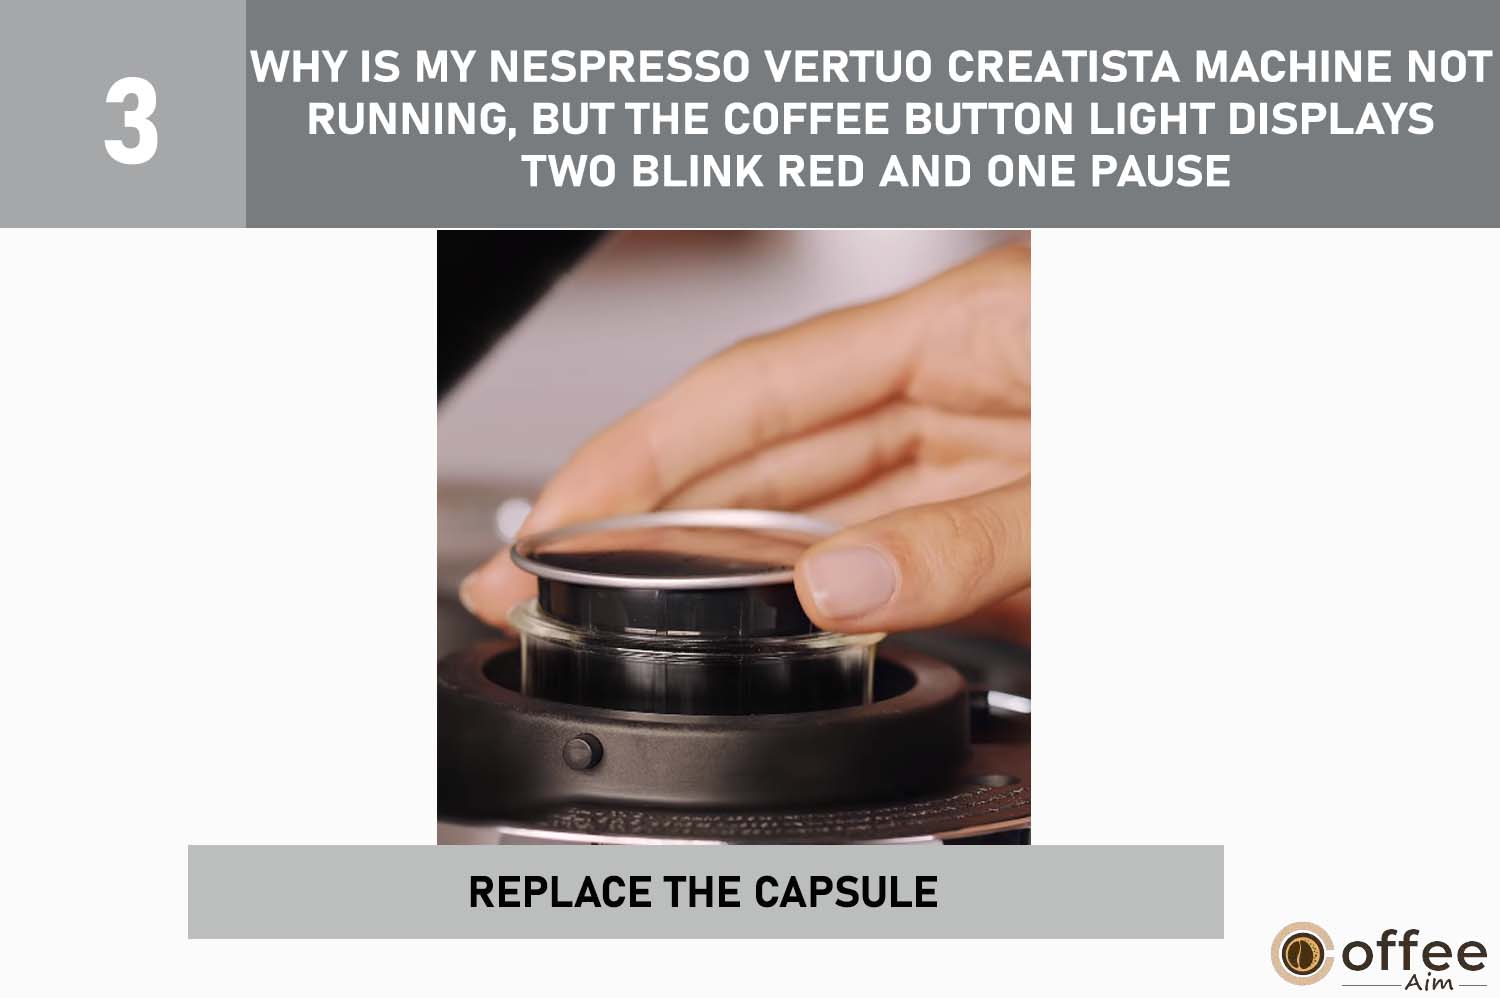 If your Nespresso Vertuo Creatista isn't working and shows two red blinks and a pause, try replacing the capsule.